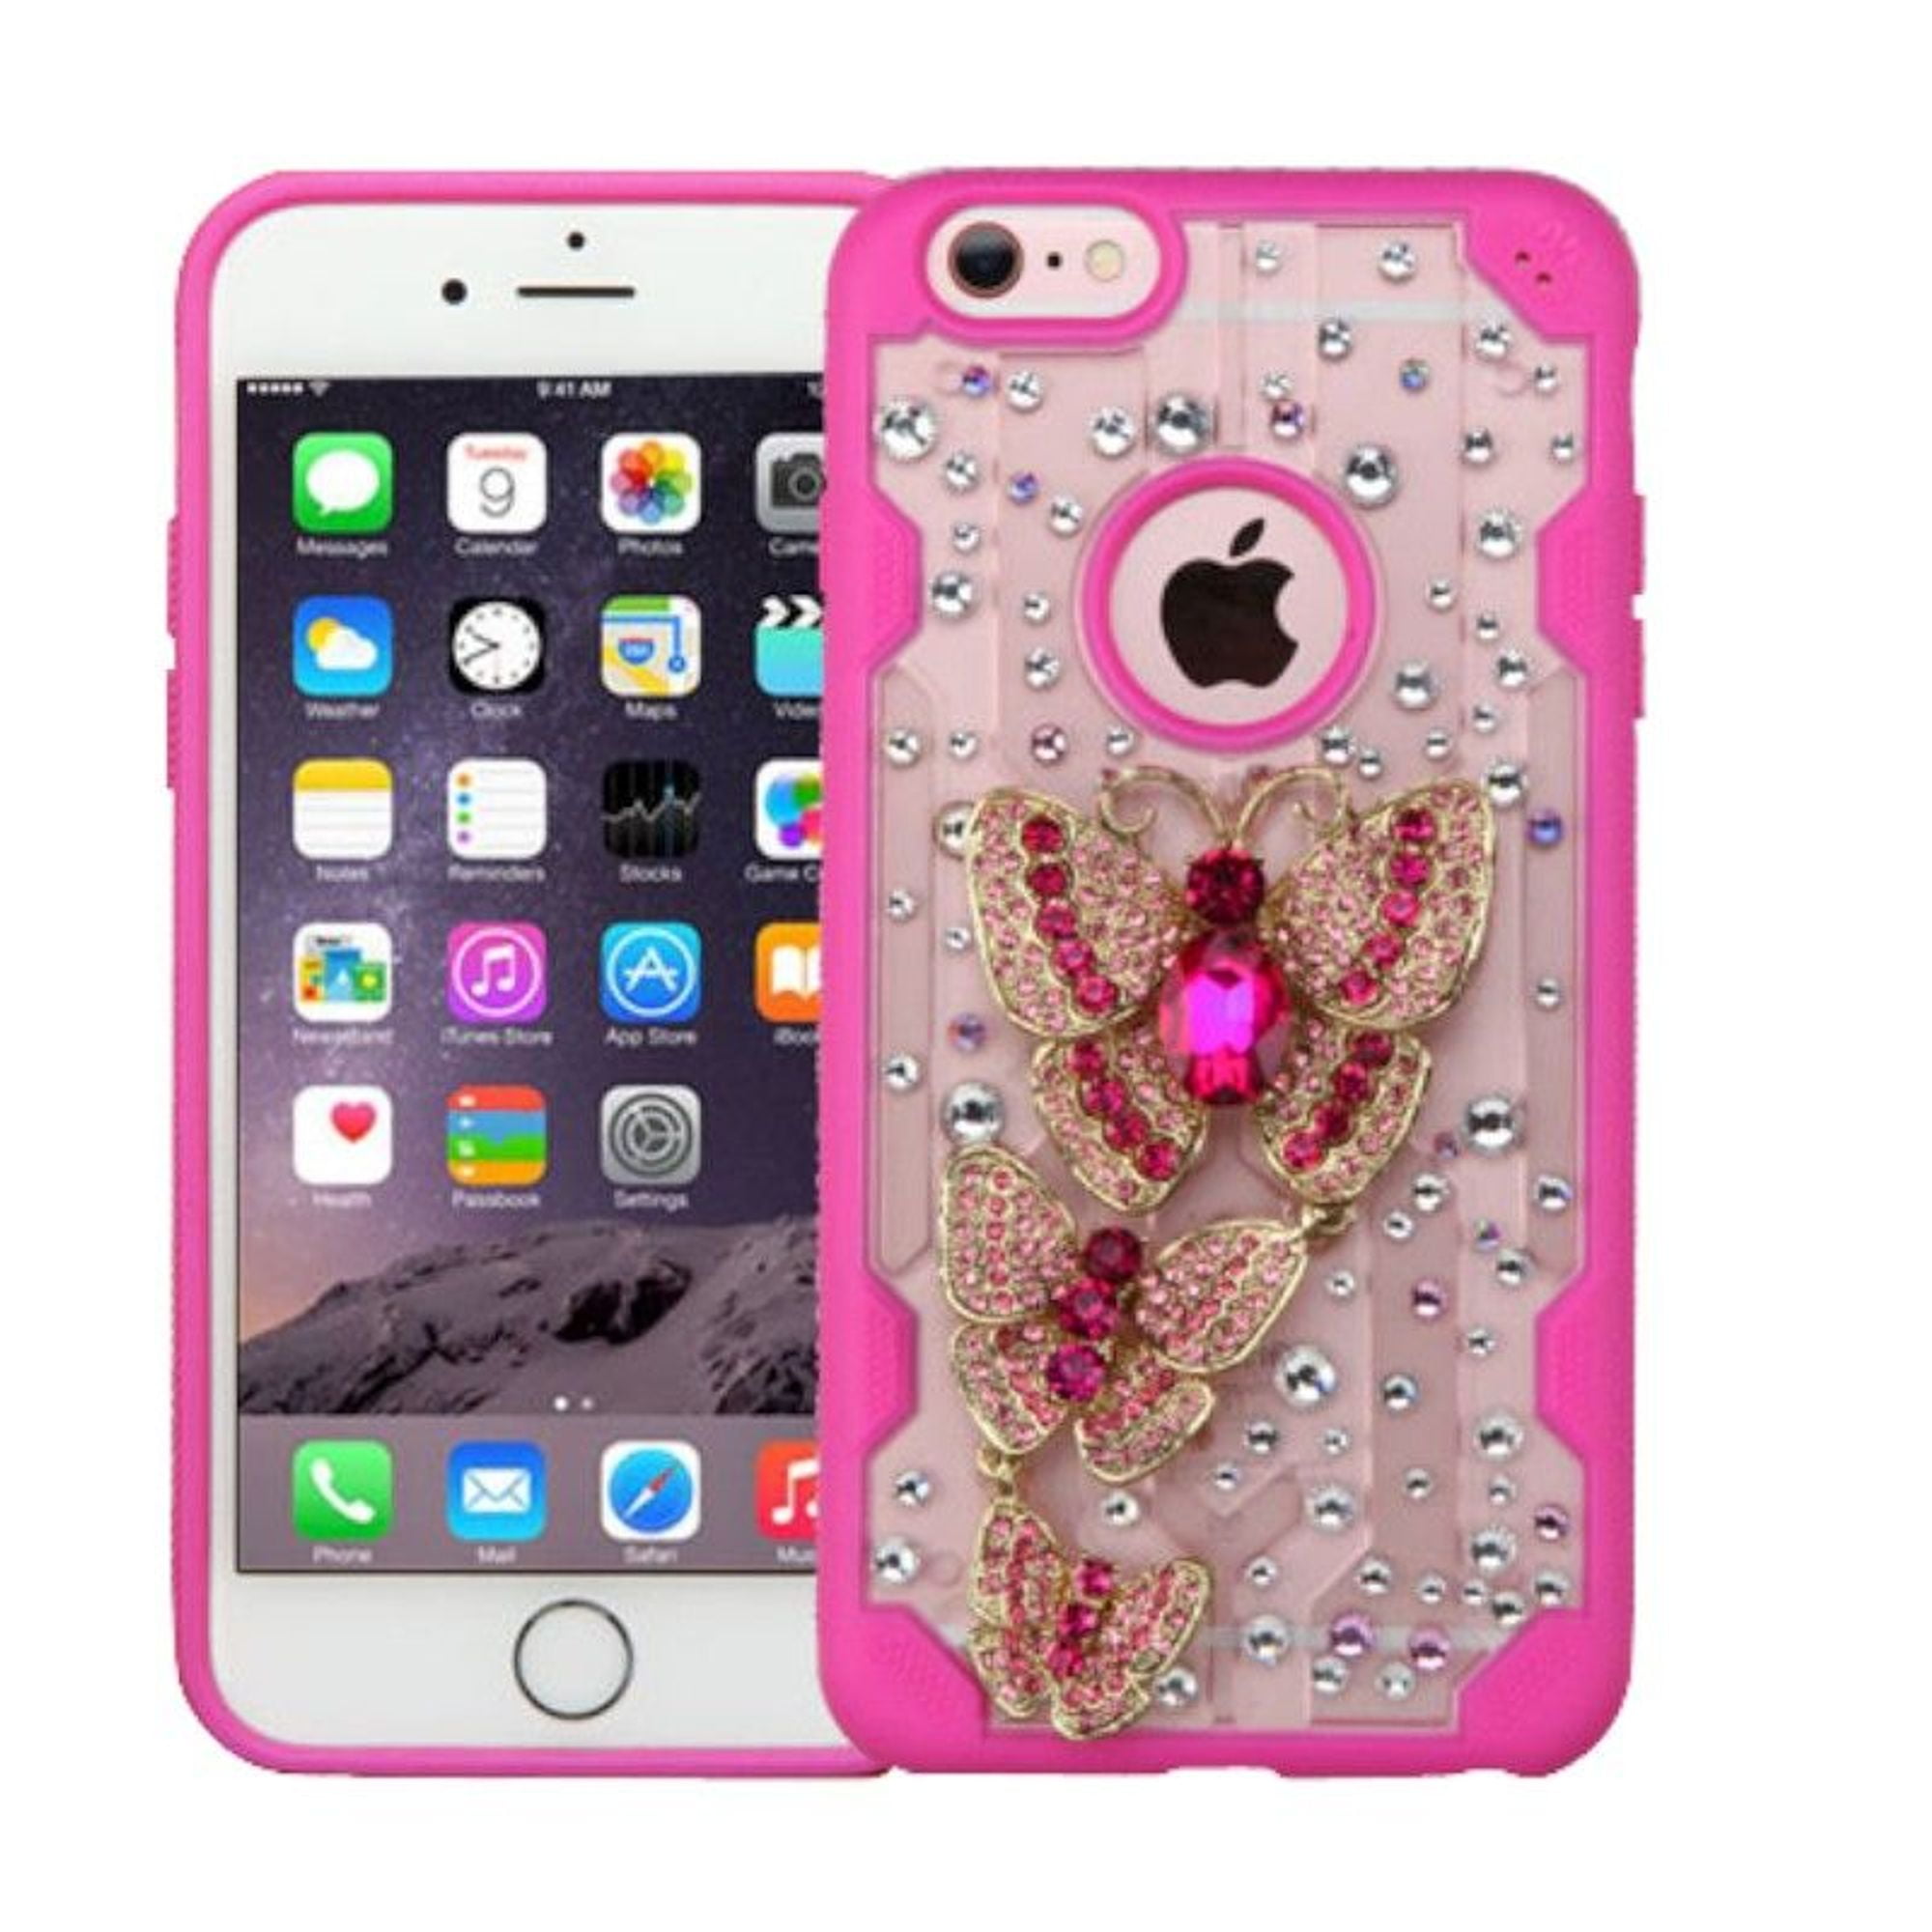 Insten Luxury Butterfly 3d Crystal Diamond Bling Diamante Hard Case Cover For Iphone 6s Plus 6 Plus Clear Hot Pink Walmart Com Walmart Com